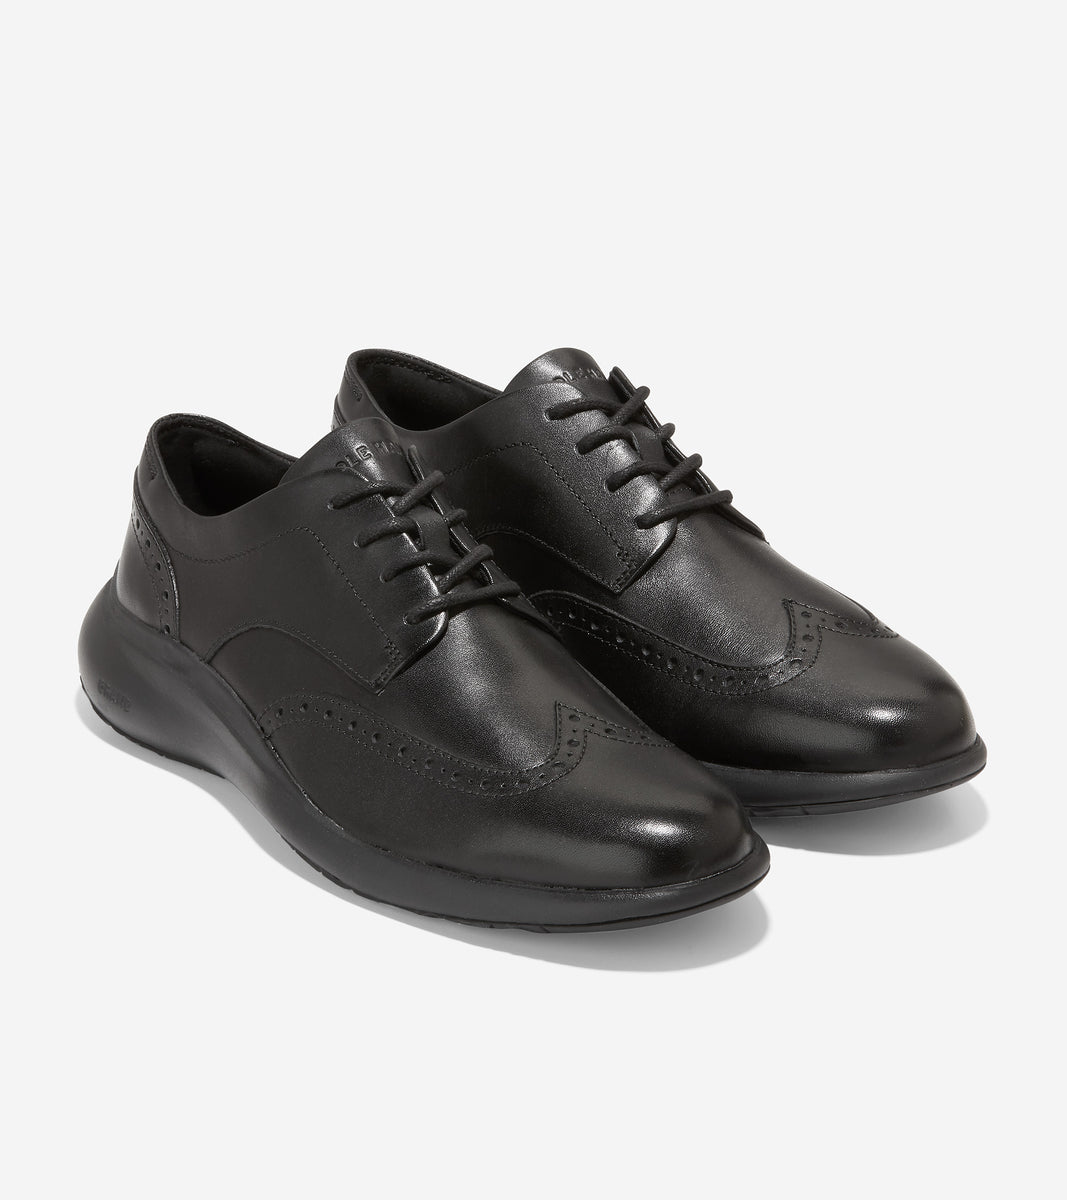 Grand Troy Wingtip Oxford